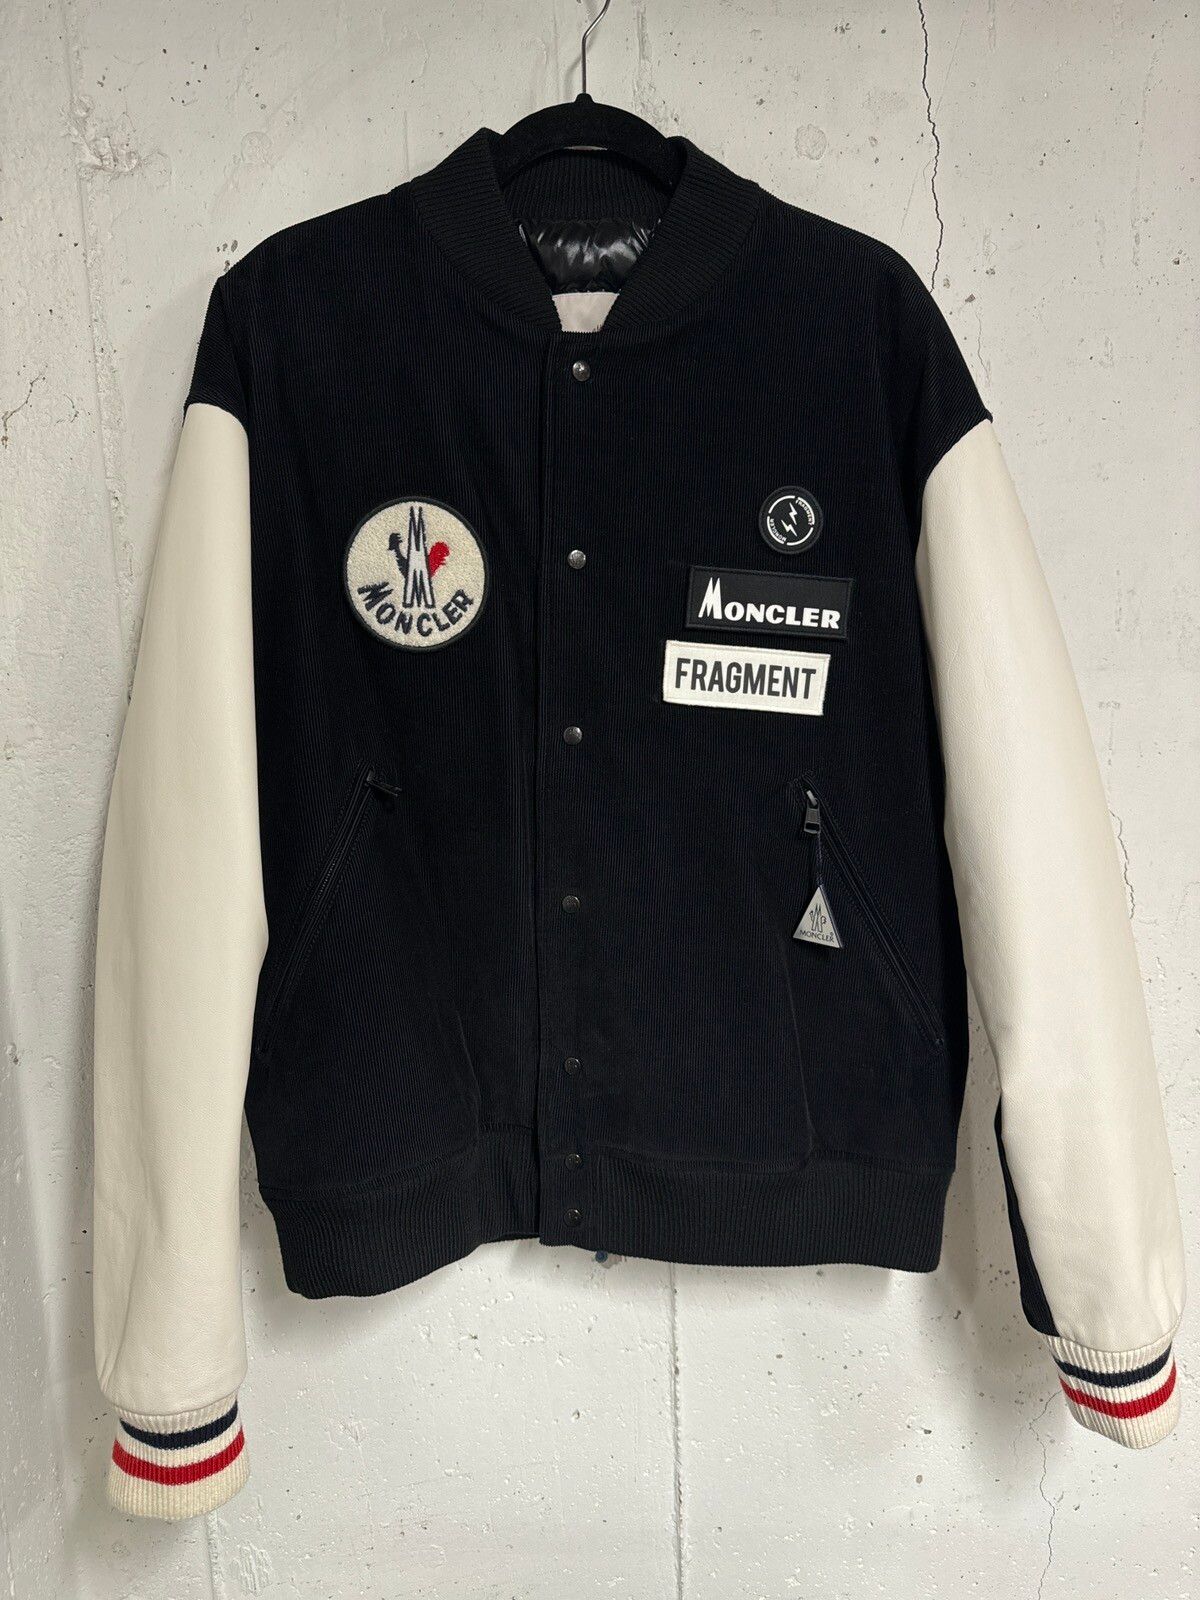 Moncler x Fragment Collaborations | Grailed